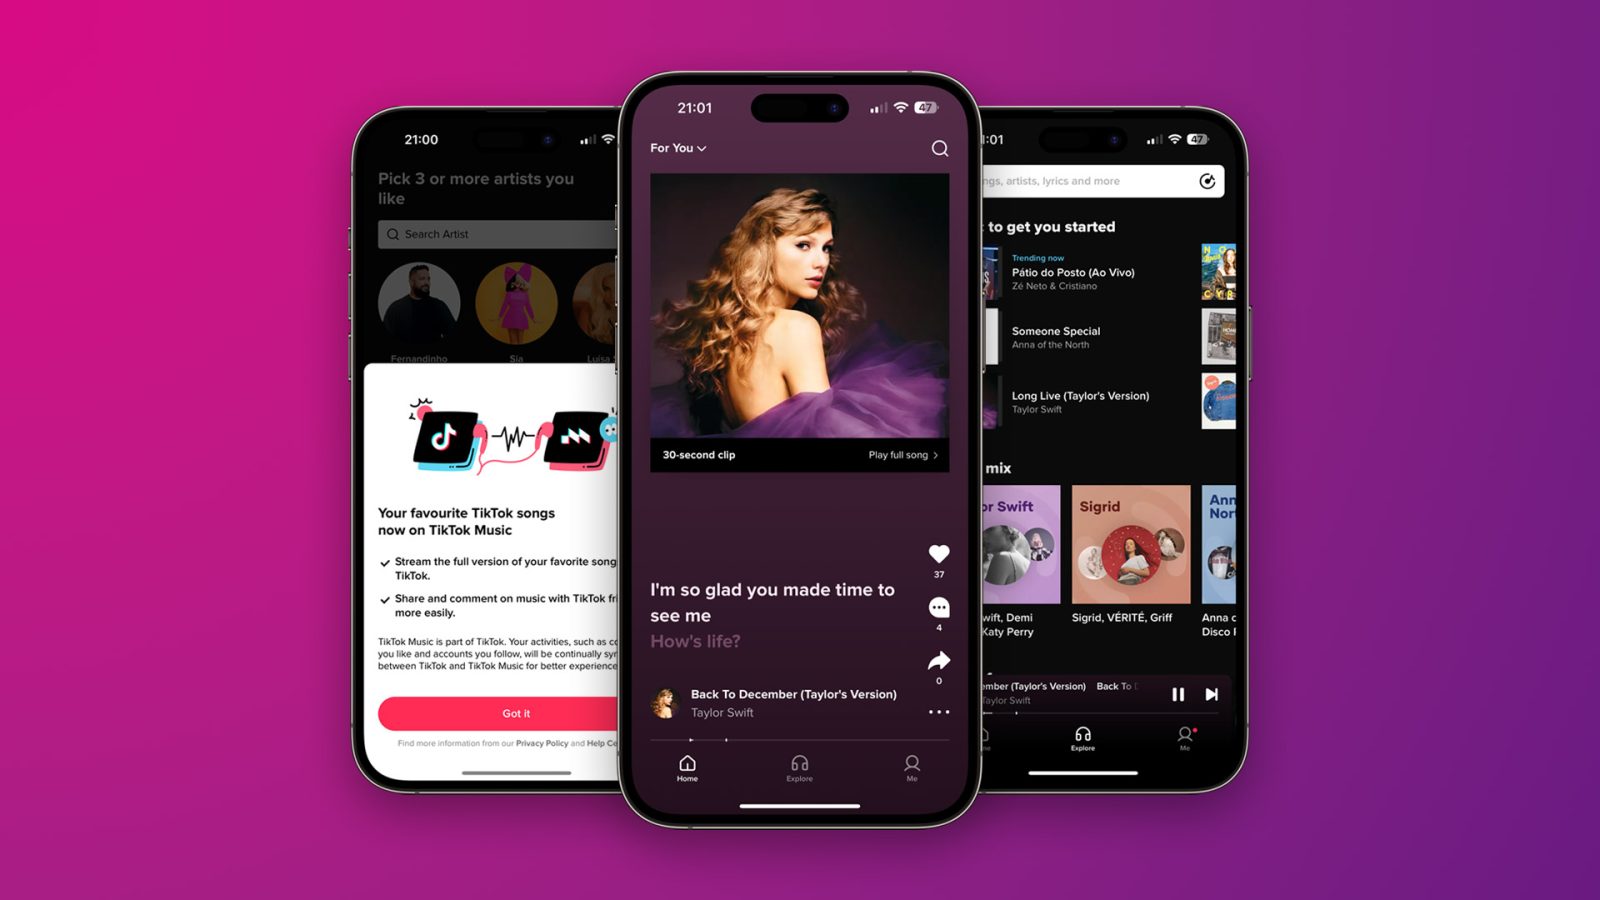 TikTok now wants to compete with Apple Music with a new streaming service